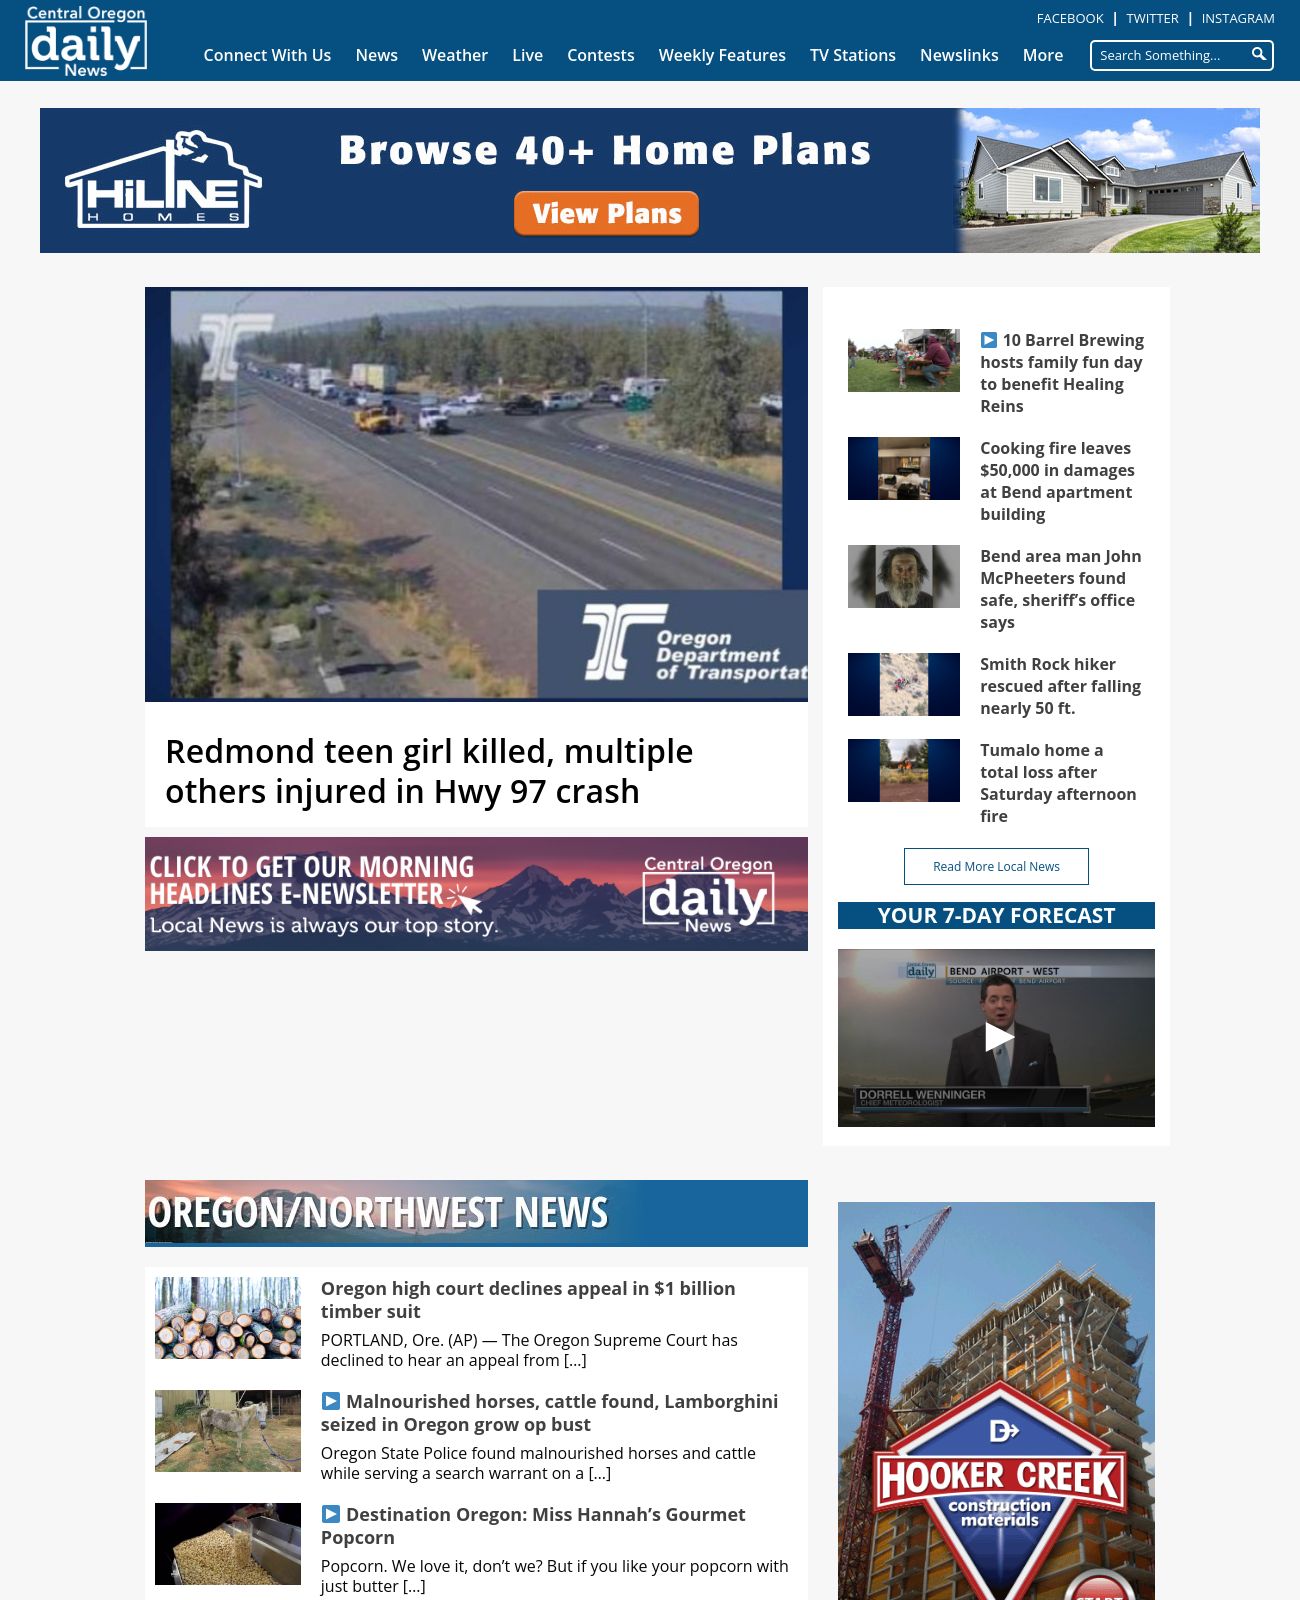 Central Oregon Daily at 2022-09-18 15:52:17-07:00 local time